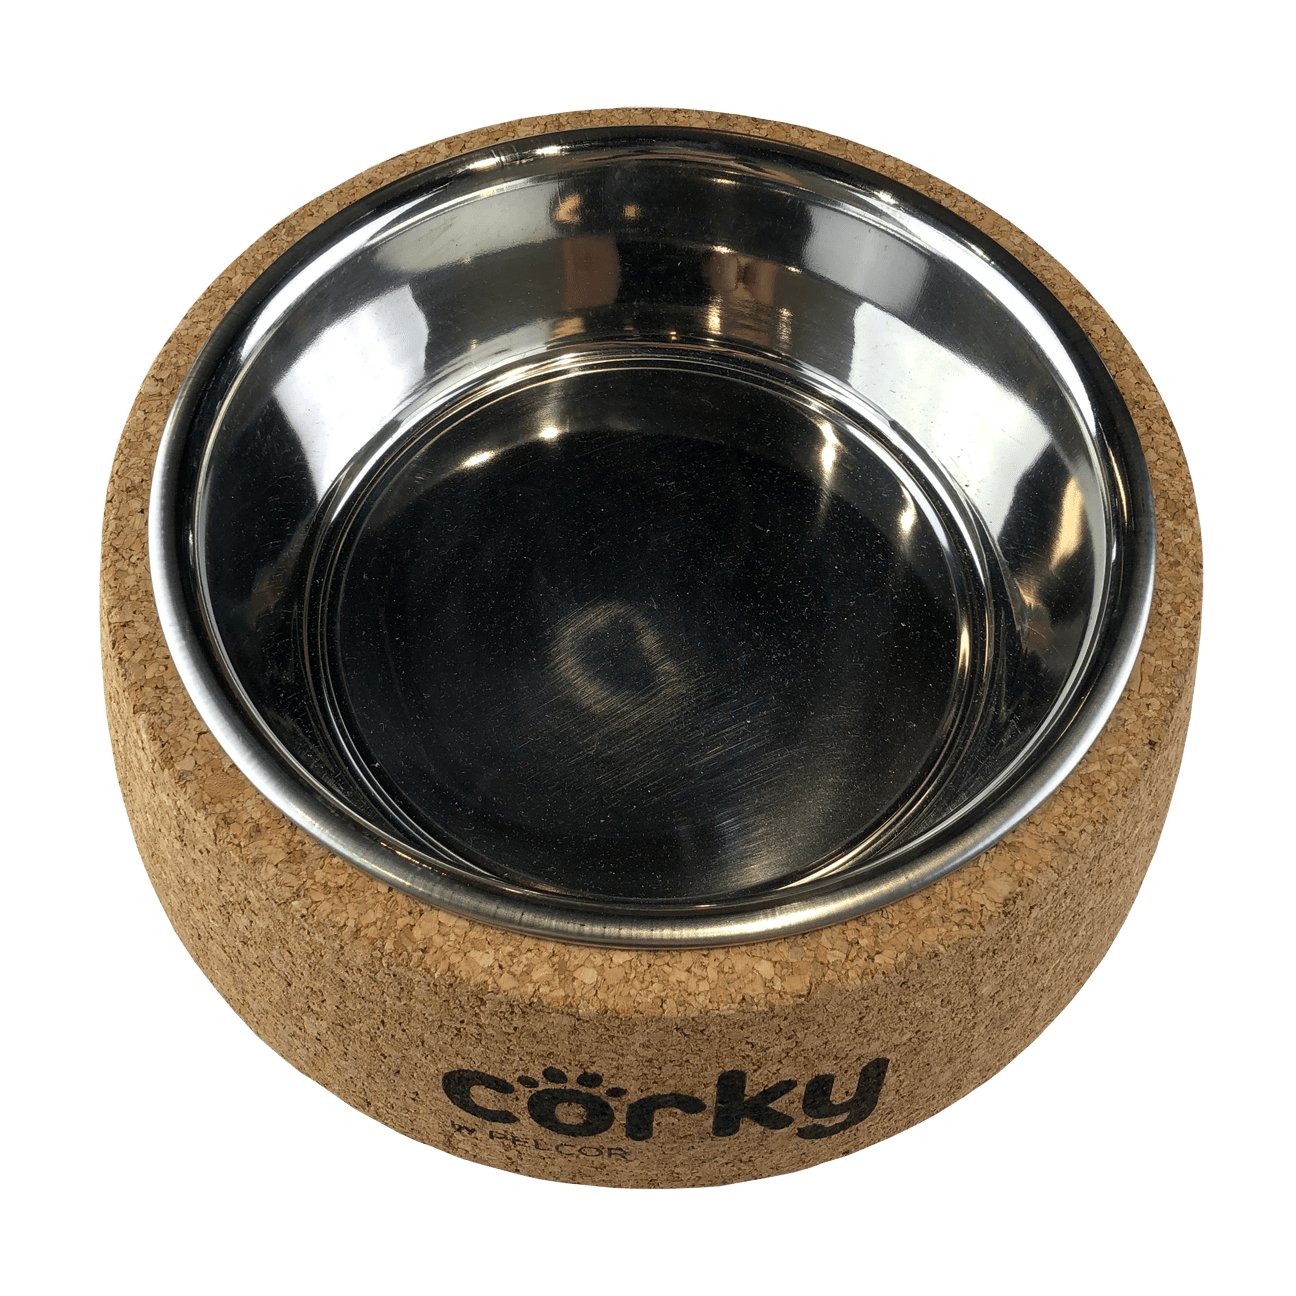 Top view of the stainless steel dog bowl sitting in a natural cork base with "corky"written in black on the side of the cork base. 